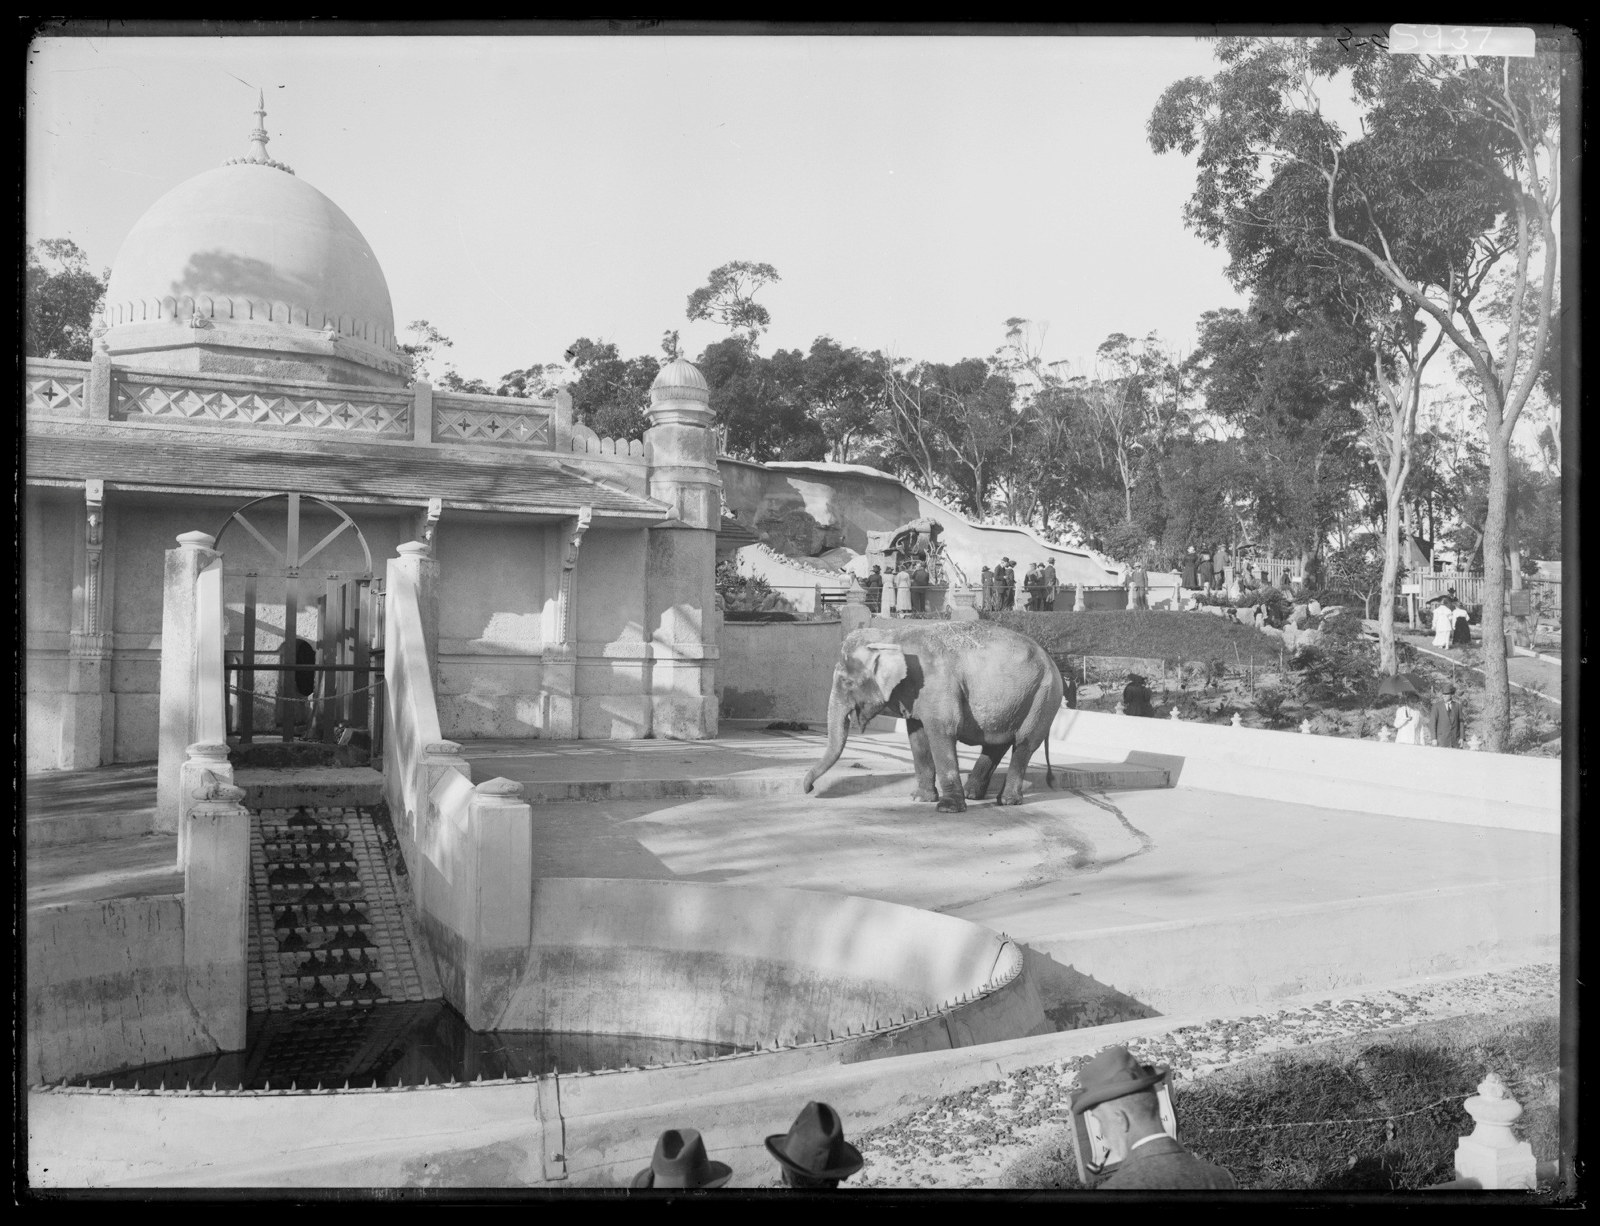 The elephant house, Taronga Park Zoo, 1916, NSW Government Printing Office, NRS4481 [7_16381] ST5937 State Archives of NSW